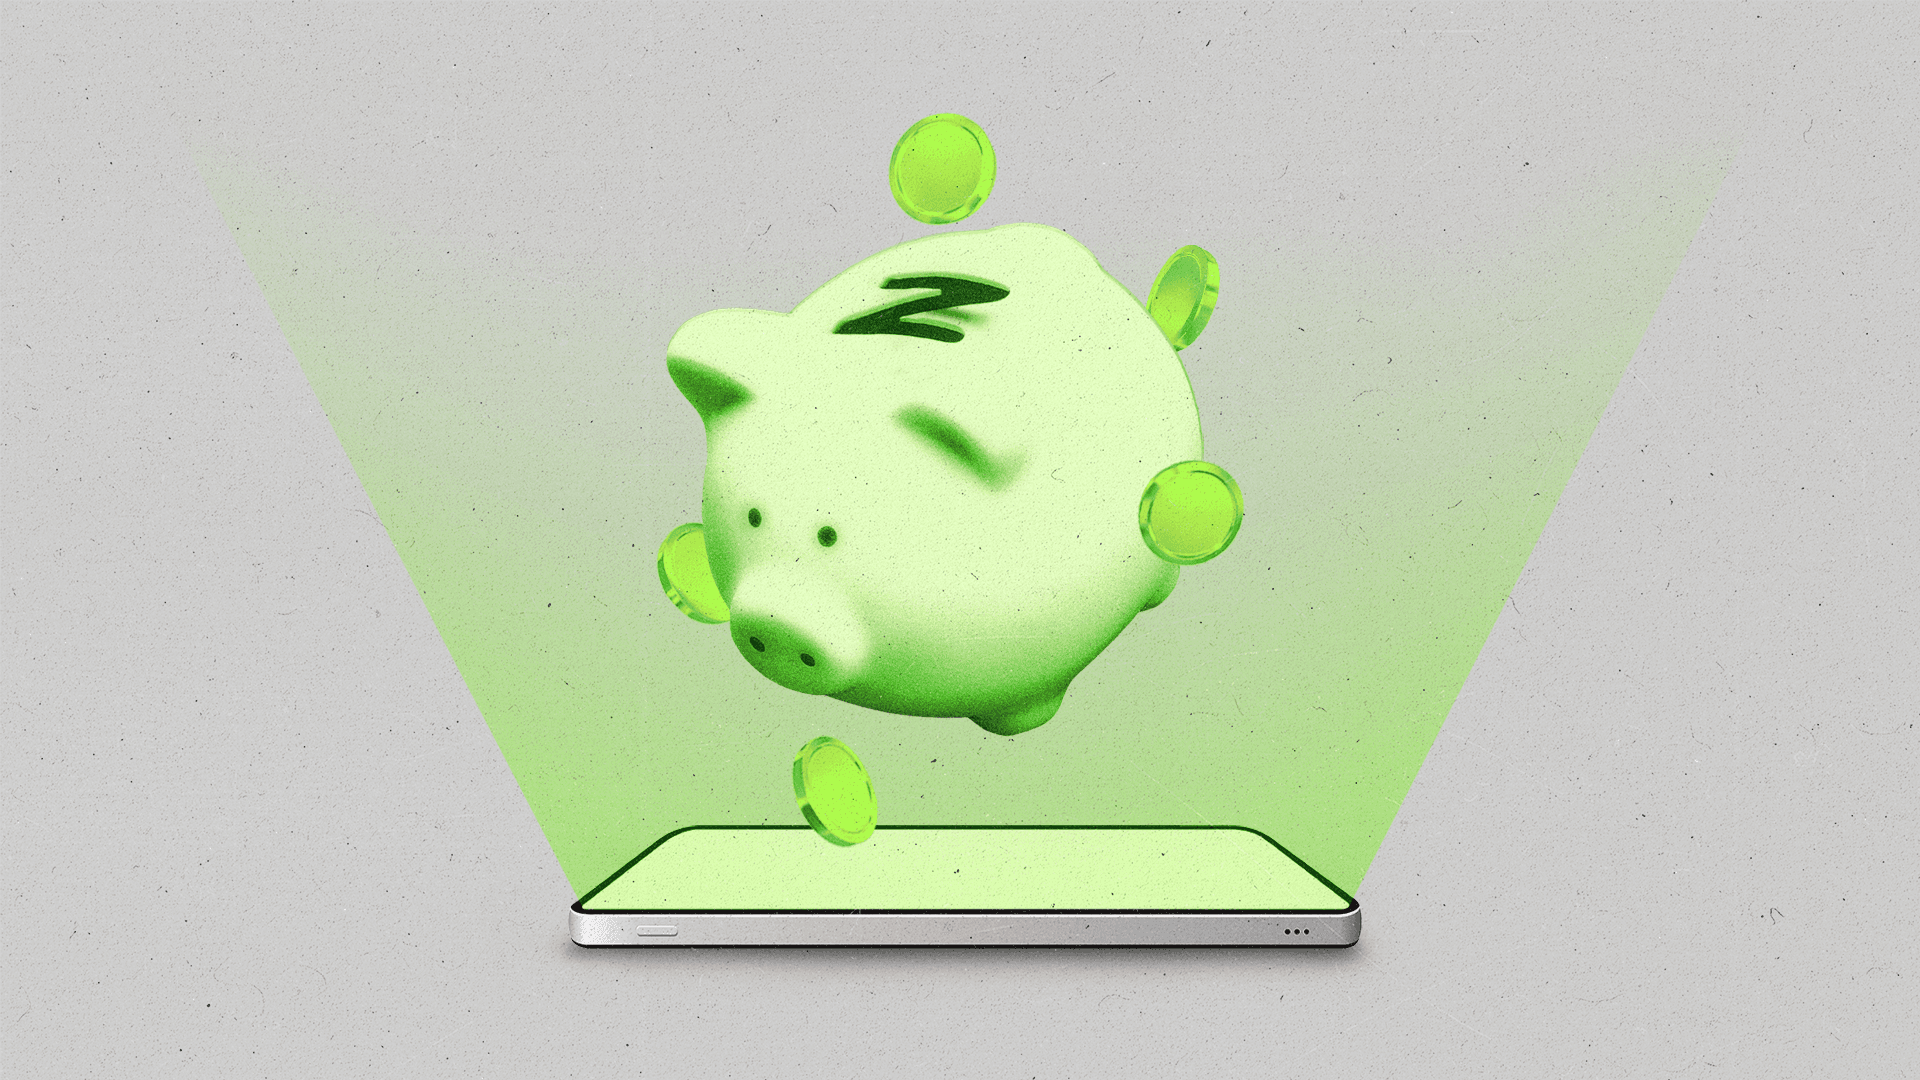 Glowing green piggy bank with "Z" coin space hovering over a cellphone with green coins in the air.